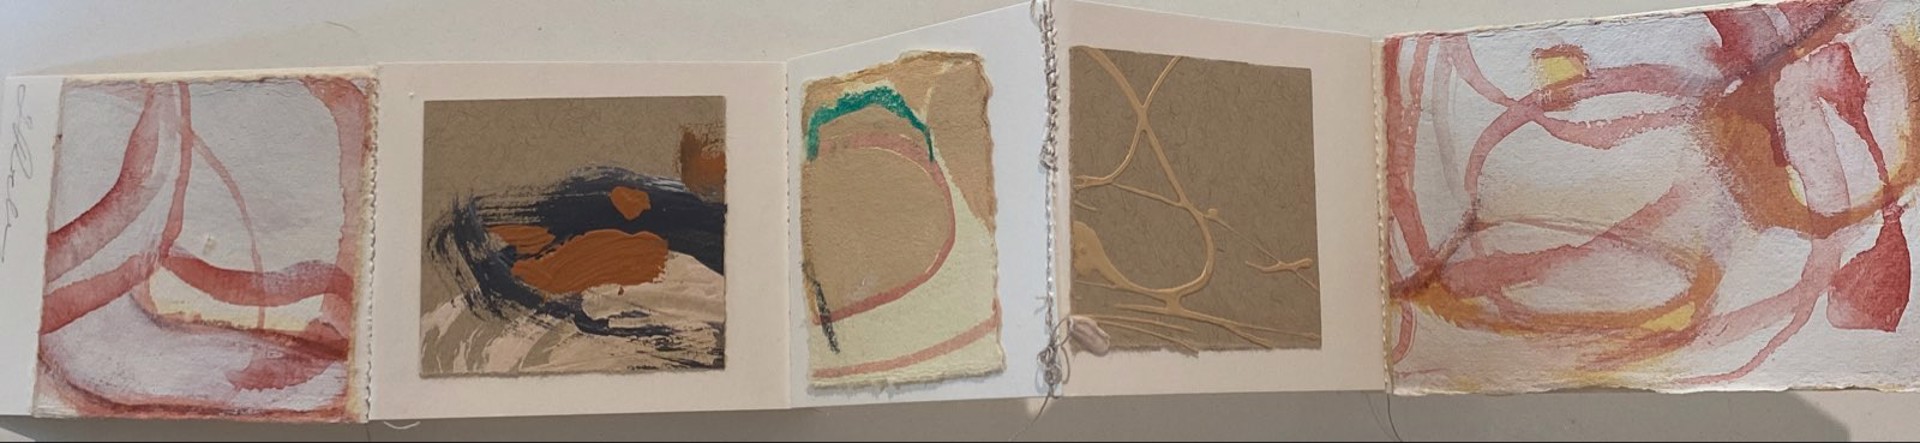 Untitled Mixed Media Book by Teresa Roche